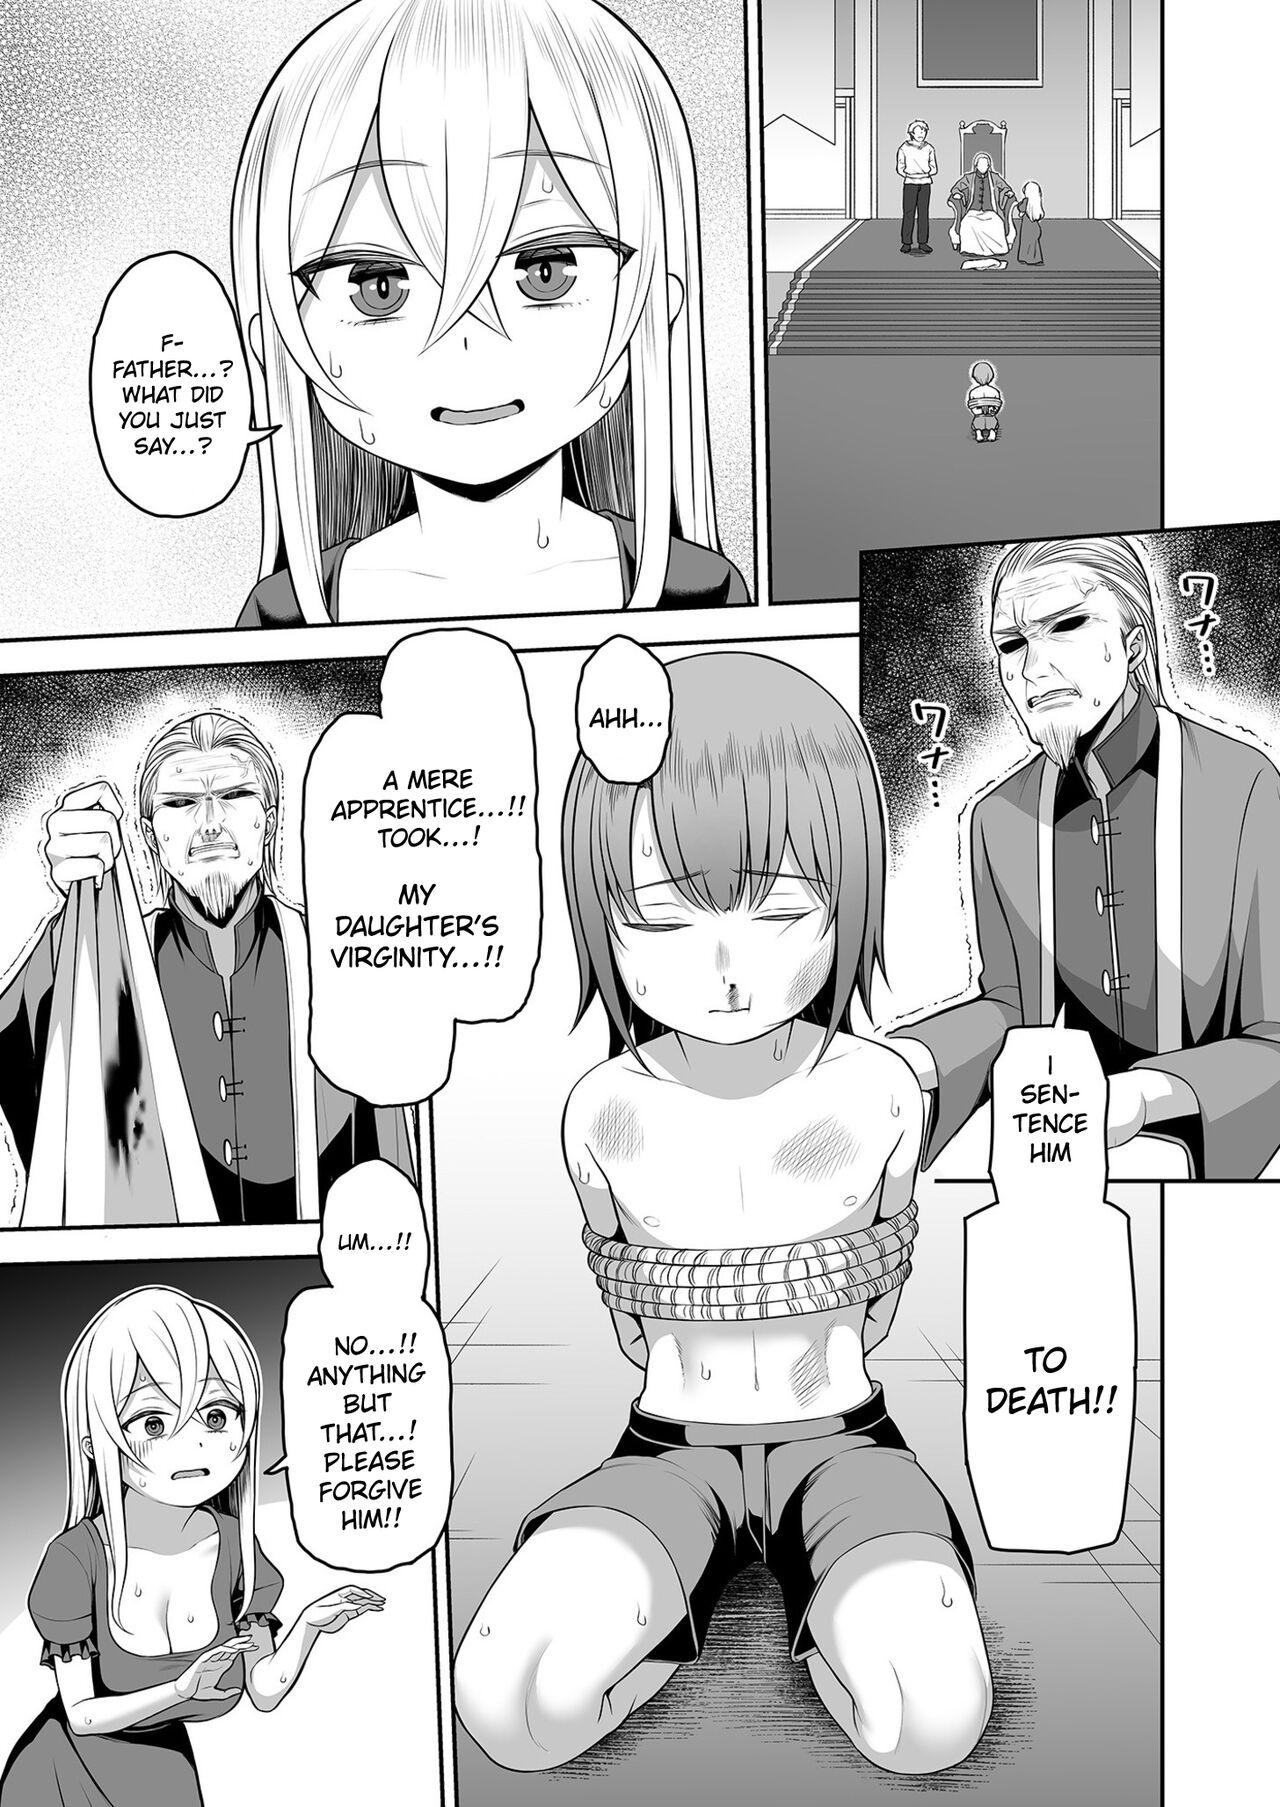 Gay Orgy [Kayumidome] Valerie Monogatari ~Oujo-sama wa Yaritai Houdai!?~ Ch1/ The Story of Valerie ~The Queen Gets To Fuck As Much As She Wants!~ Ch.1 [English] {Doujins.com} Stepsister - Page 11